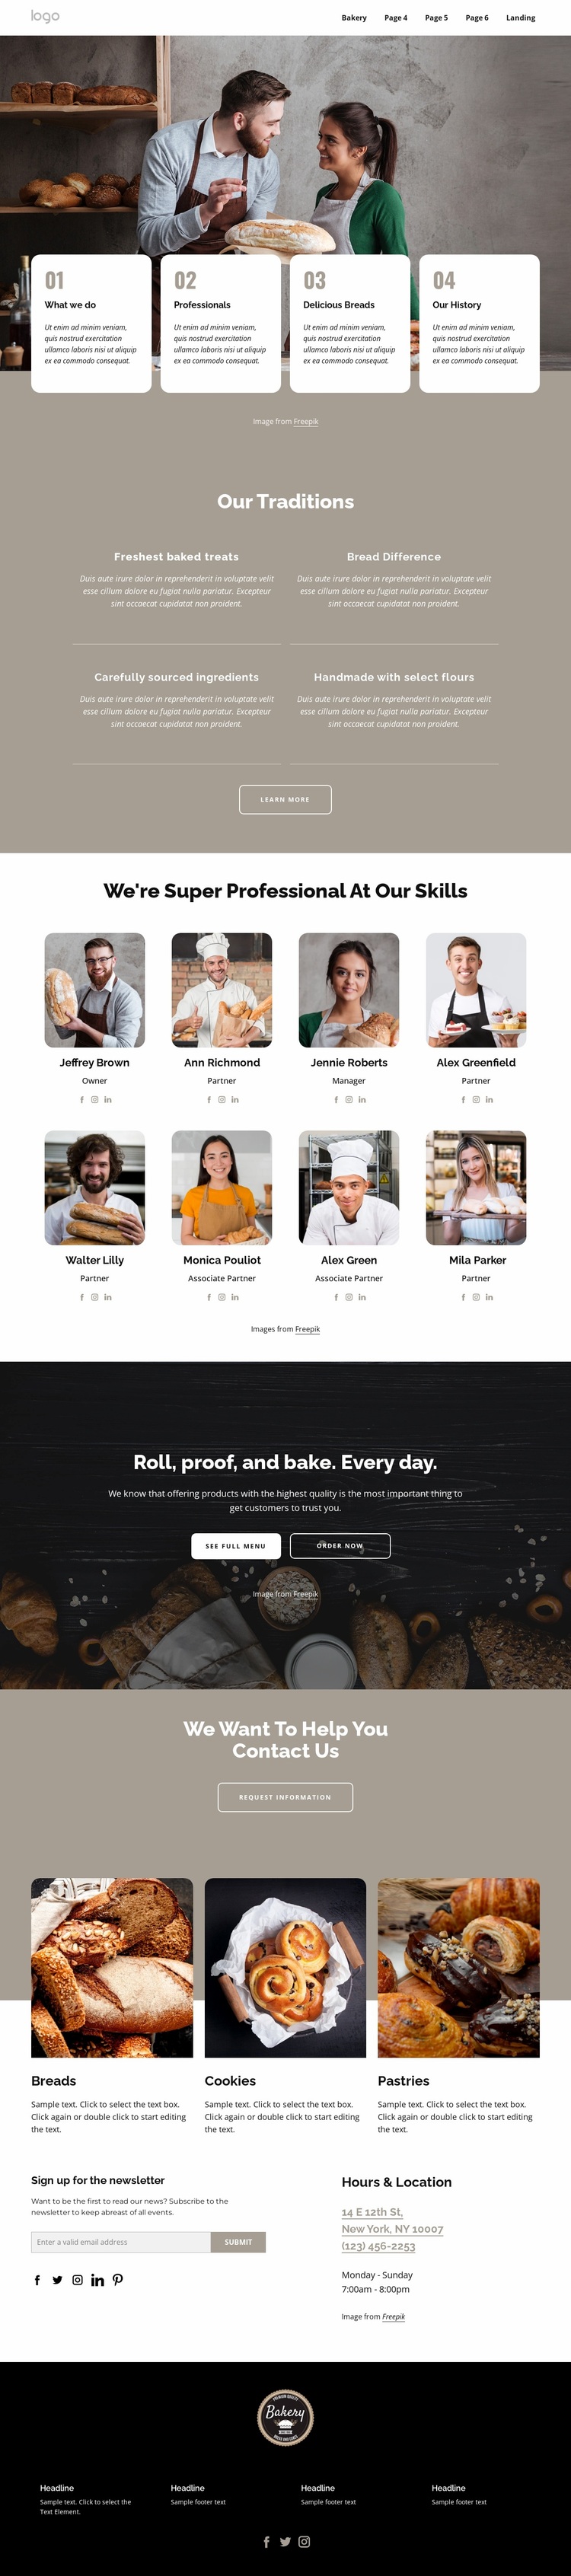 We are professional bakers Website Design